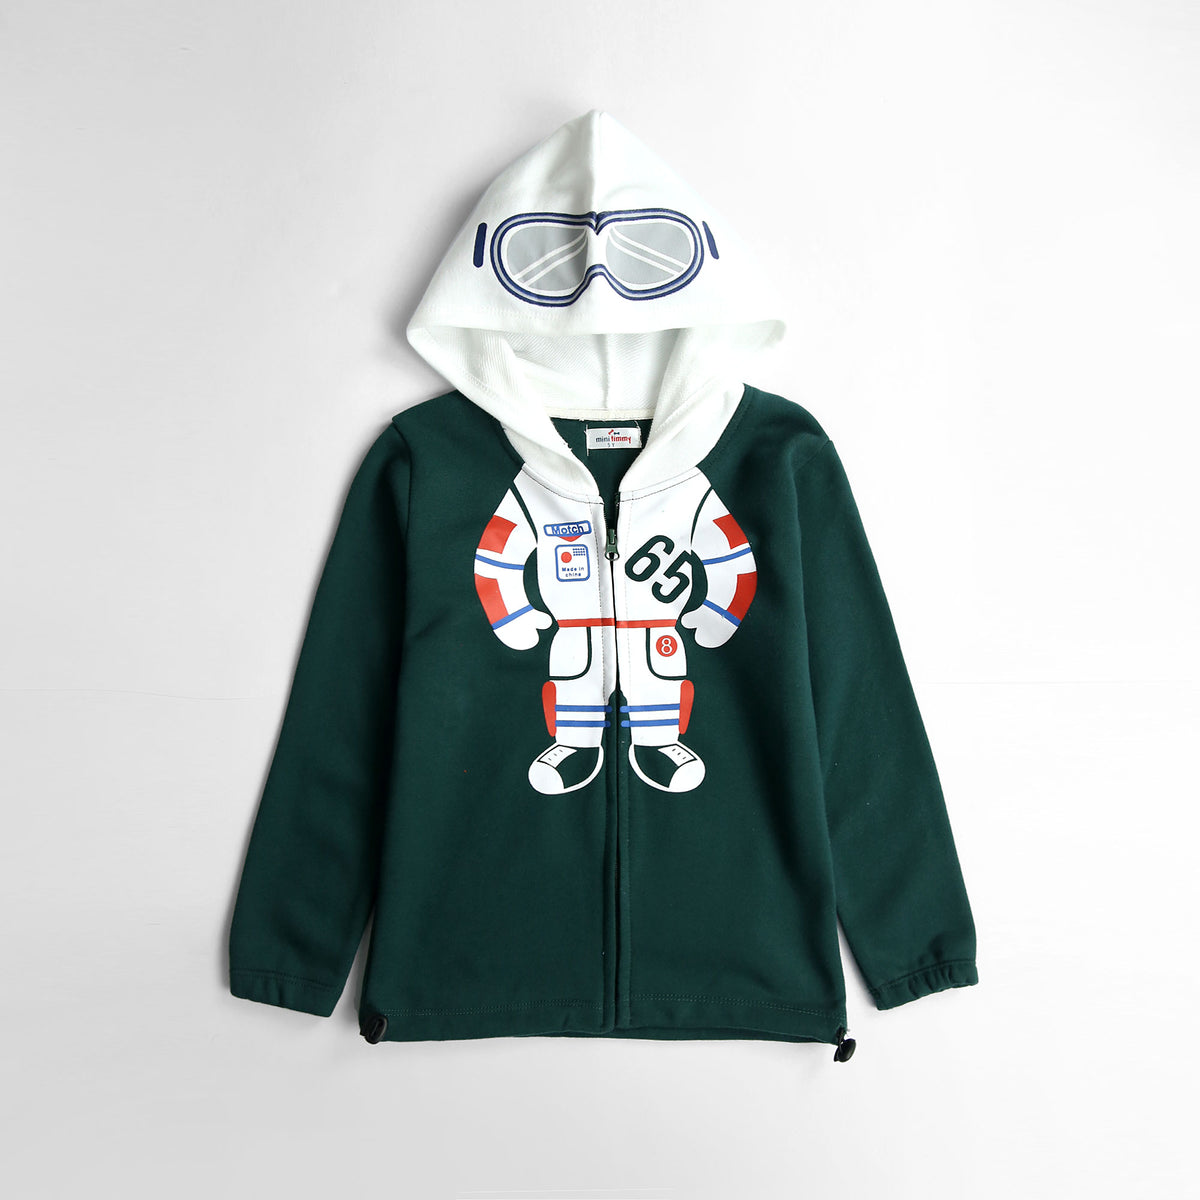 Kids Animated Printed Soft Cotton Green Terry Zipper Hoodie